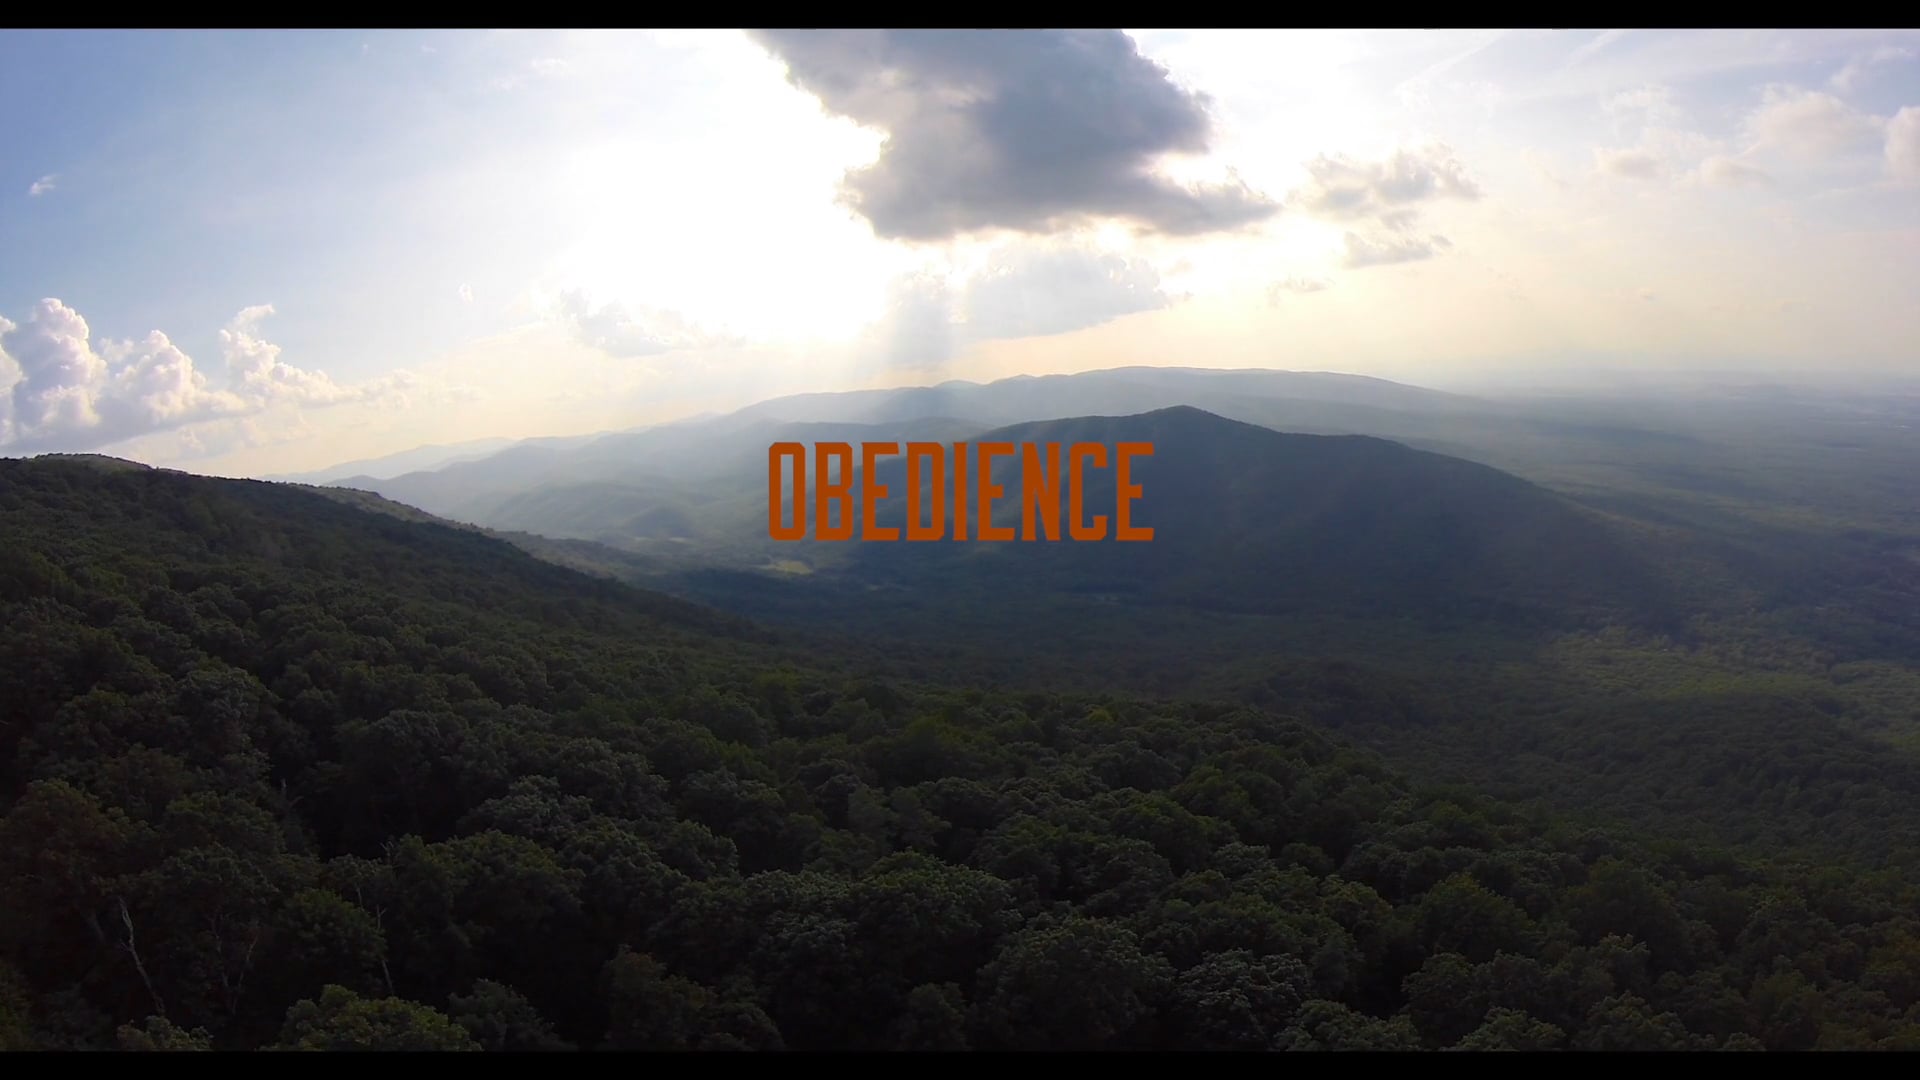 OBEDIENCE feature film pitch